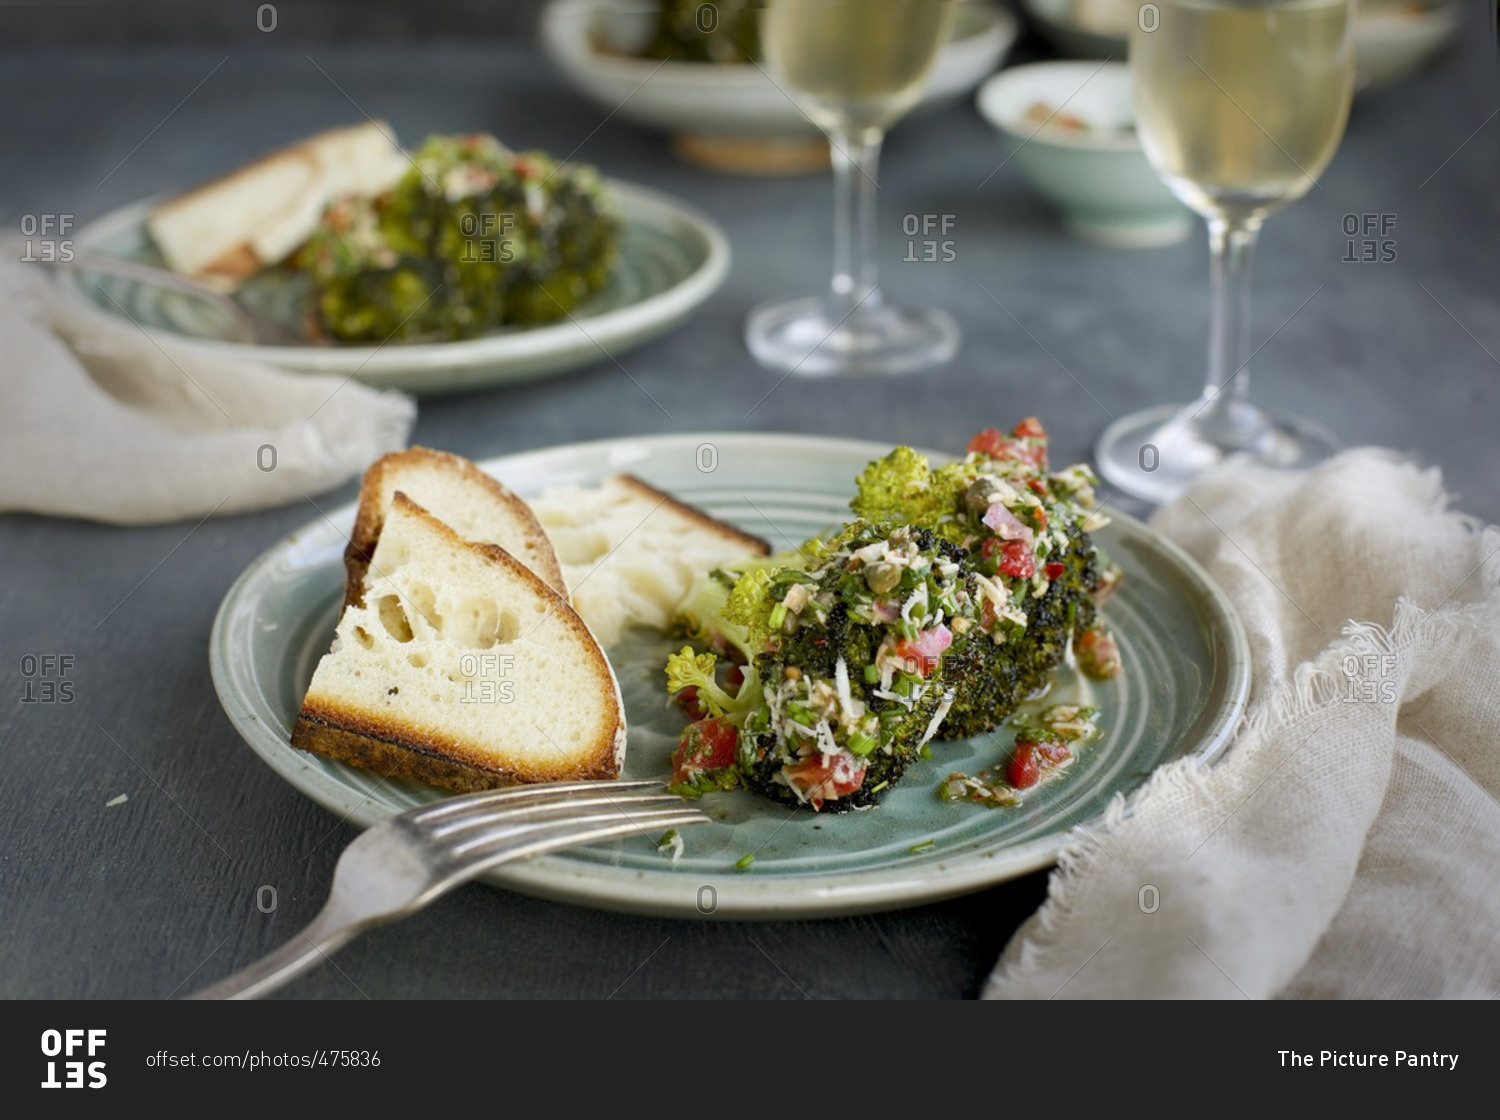 Plates of roasted broccoli with tomatoes and cheese served with bread and white wine